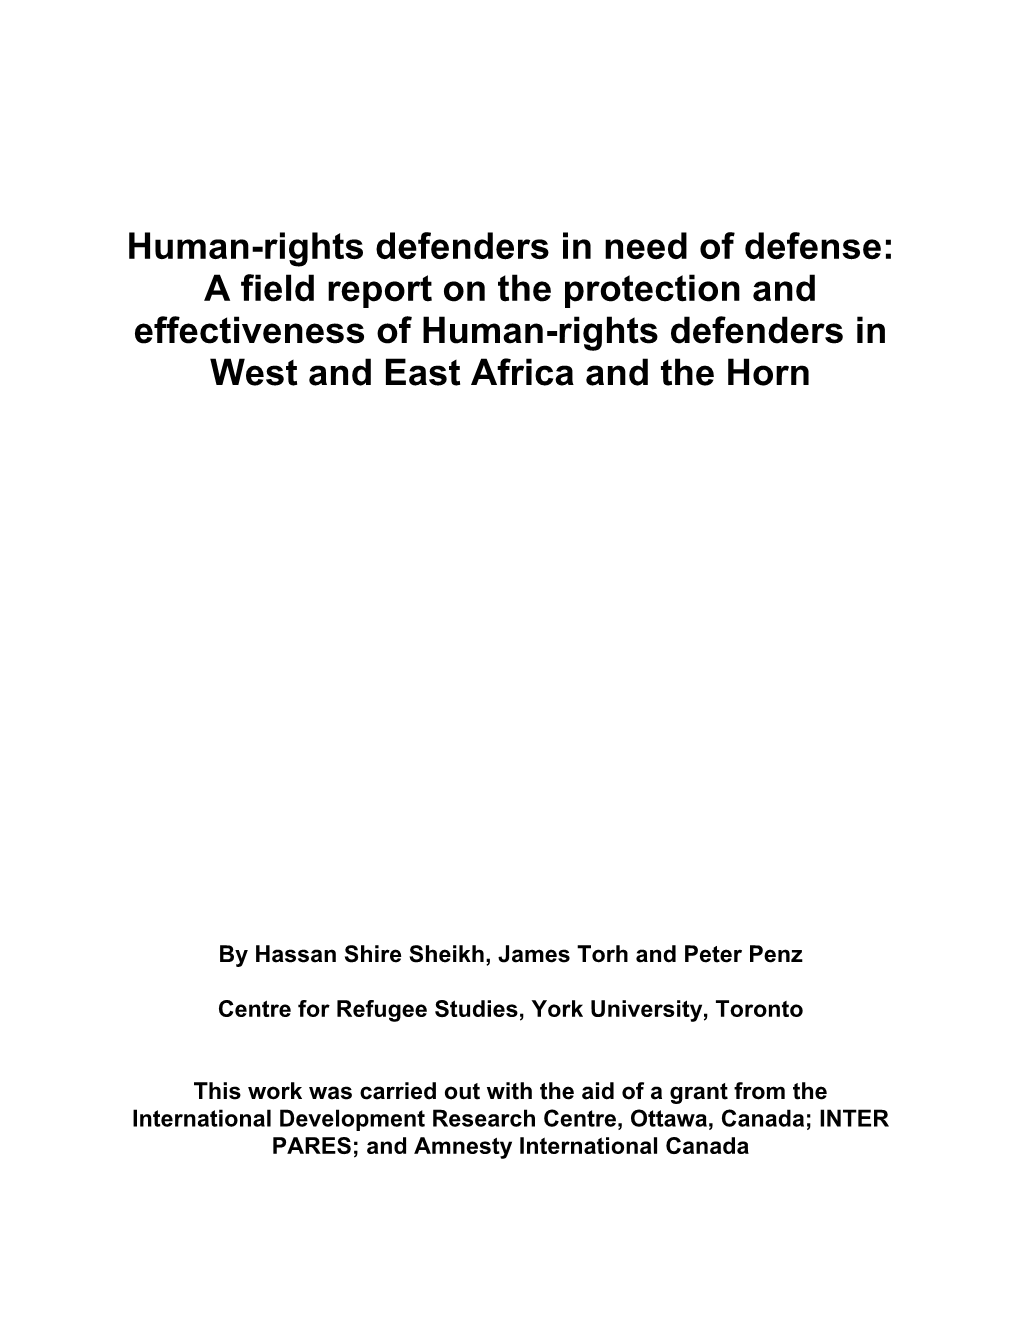 A Field Report on the Protection and Effectiveness of Human-Rights Defenders in West and East Africa and the Horn